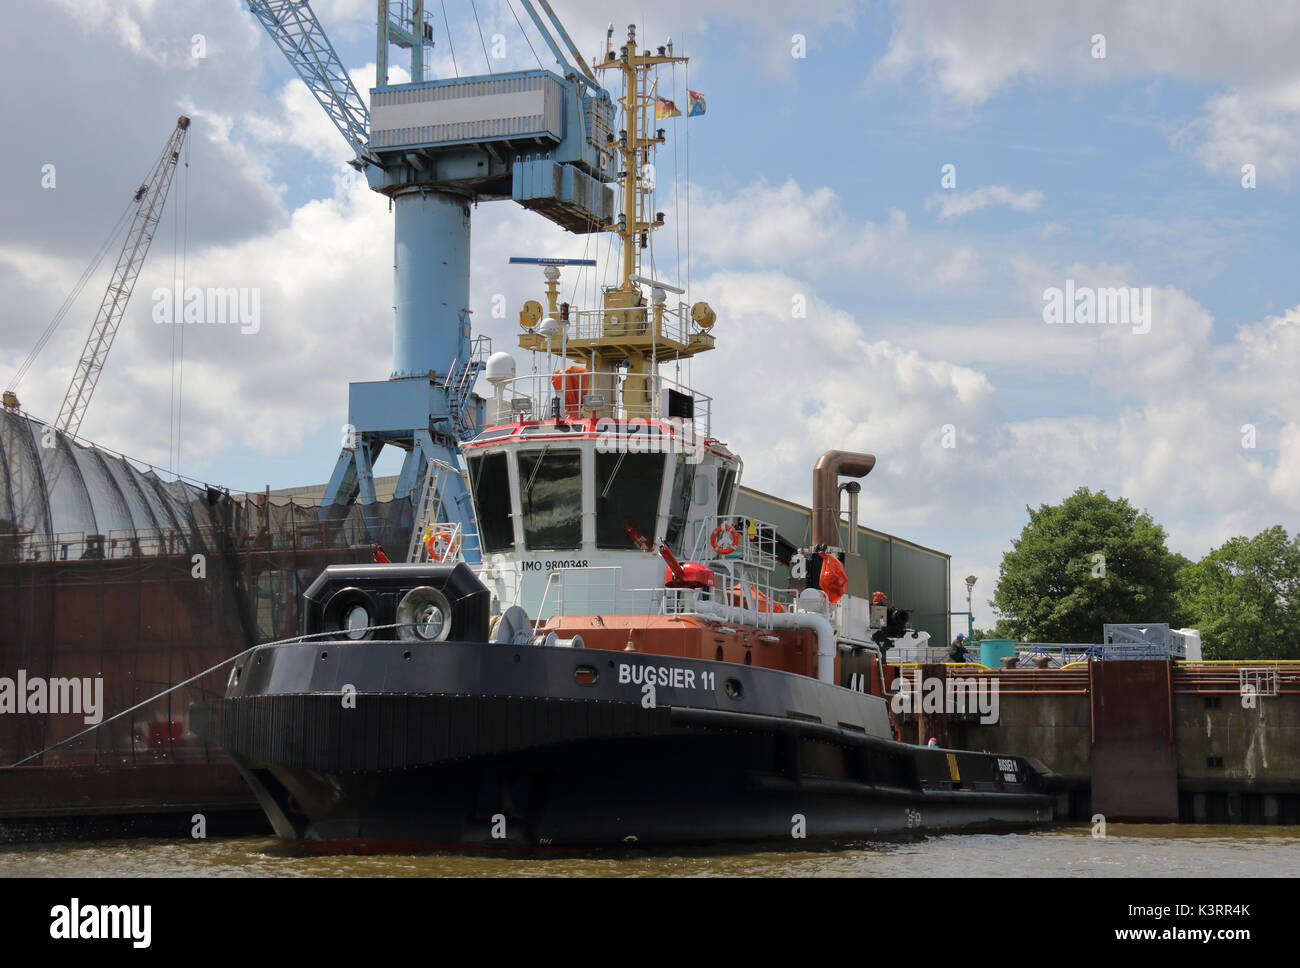 The harbor tugboat Bugsier 11 is located at the shipyard in the Port of Hamburg. Stock Photo